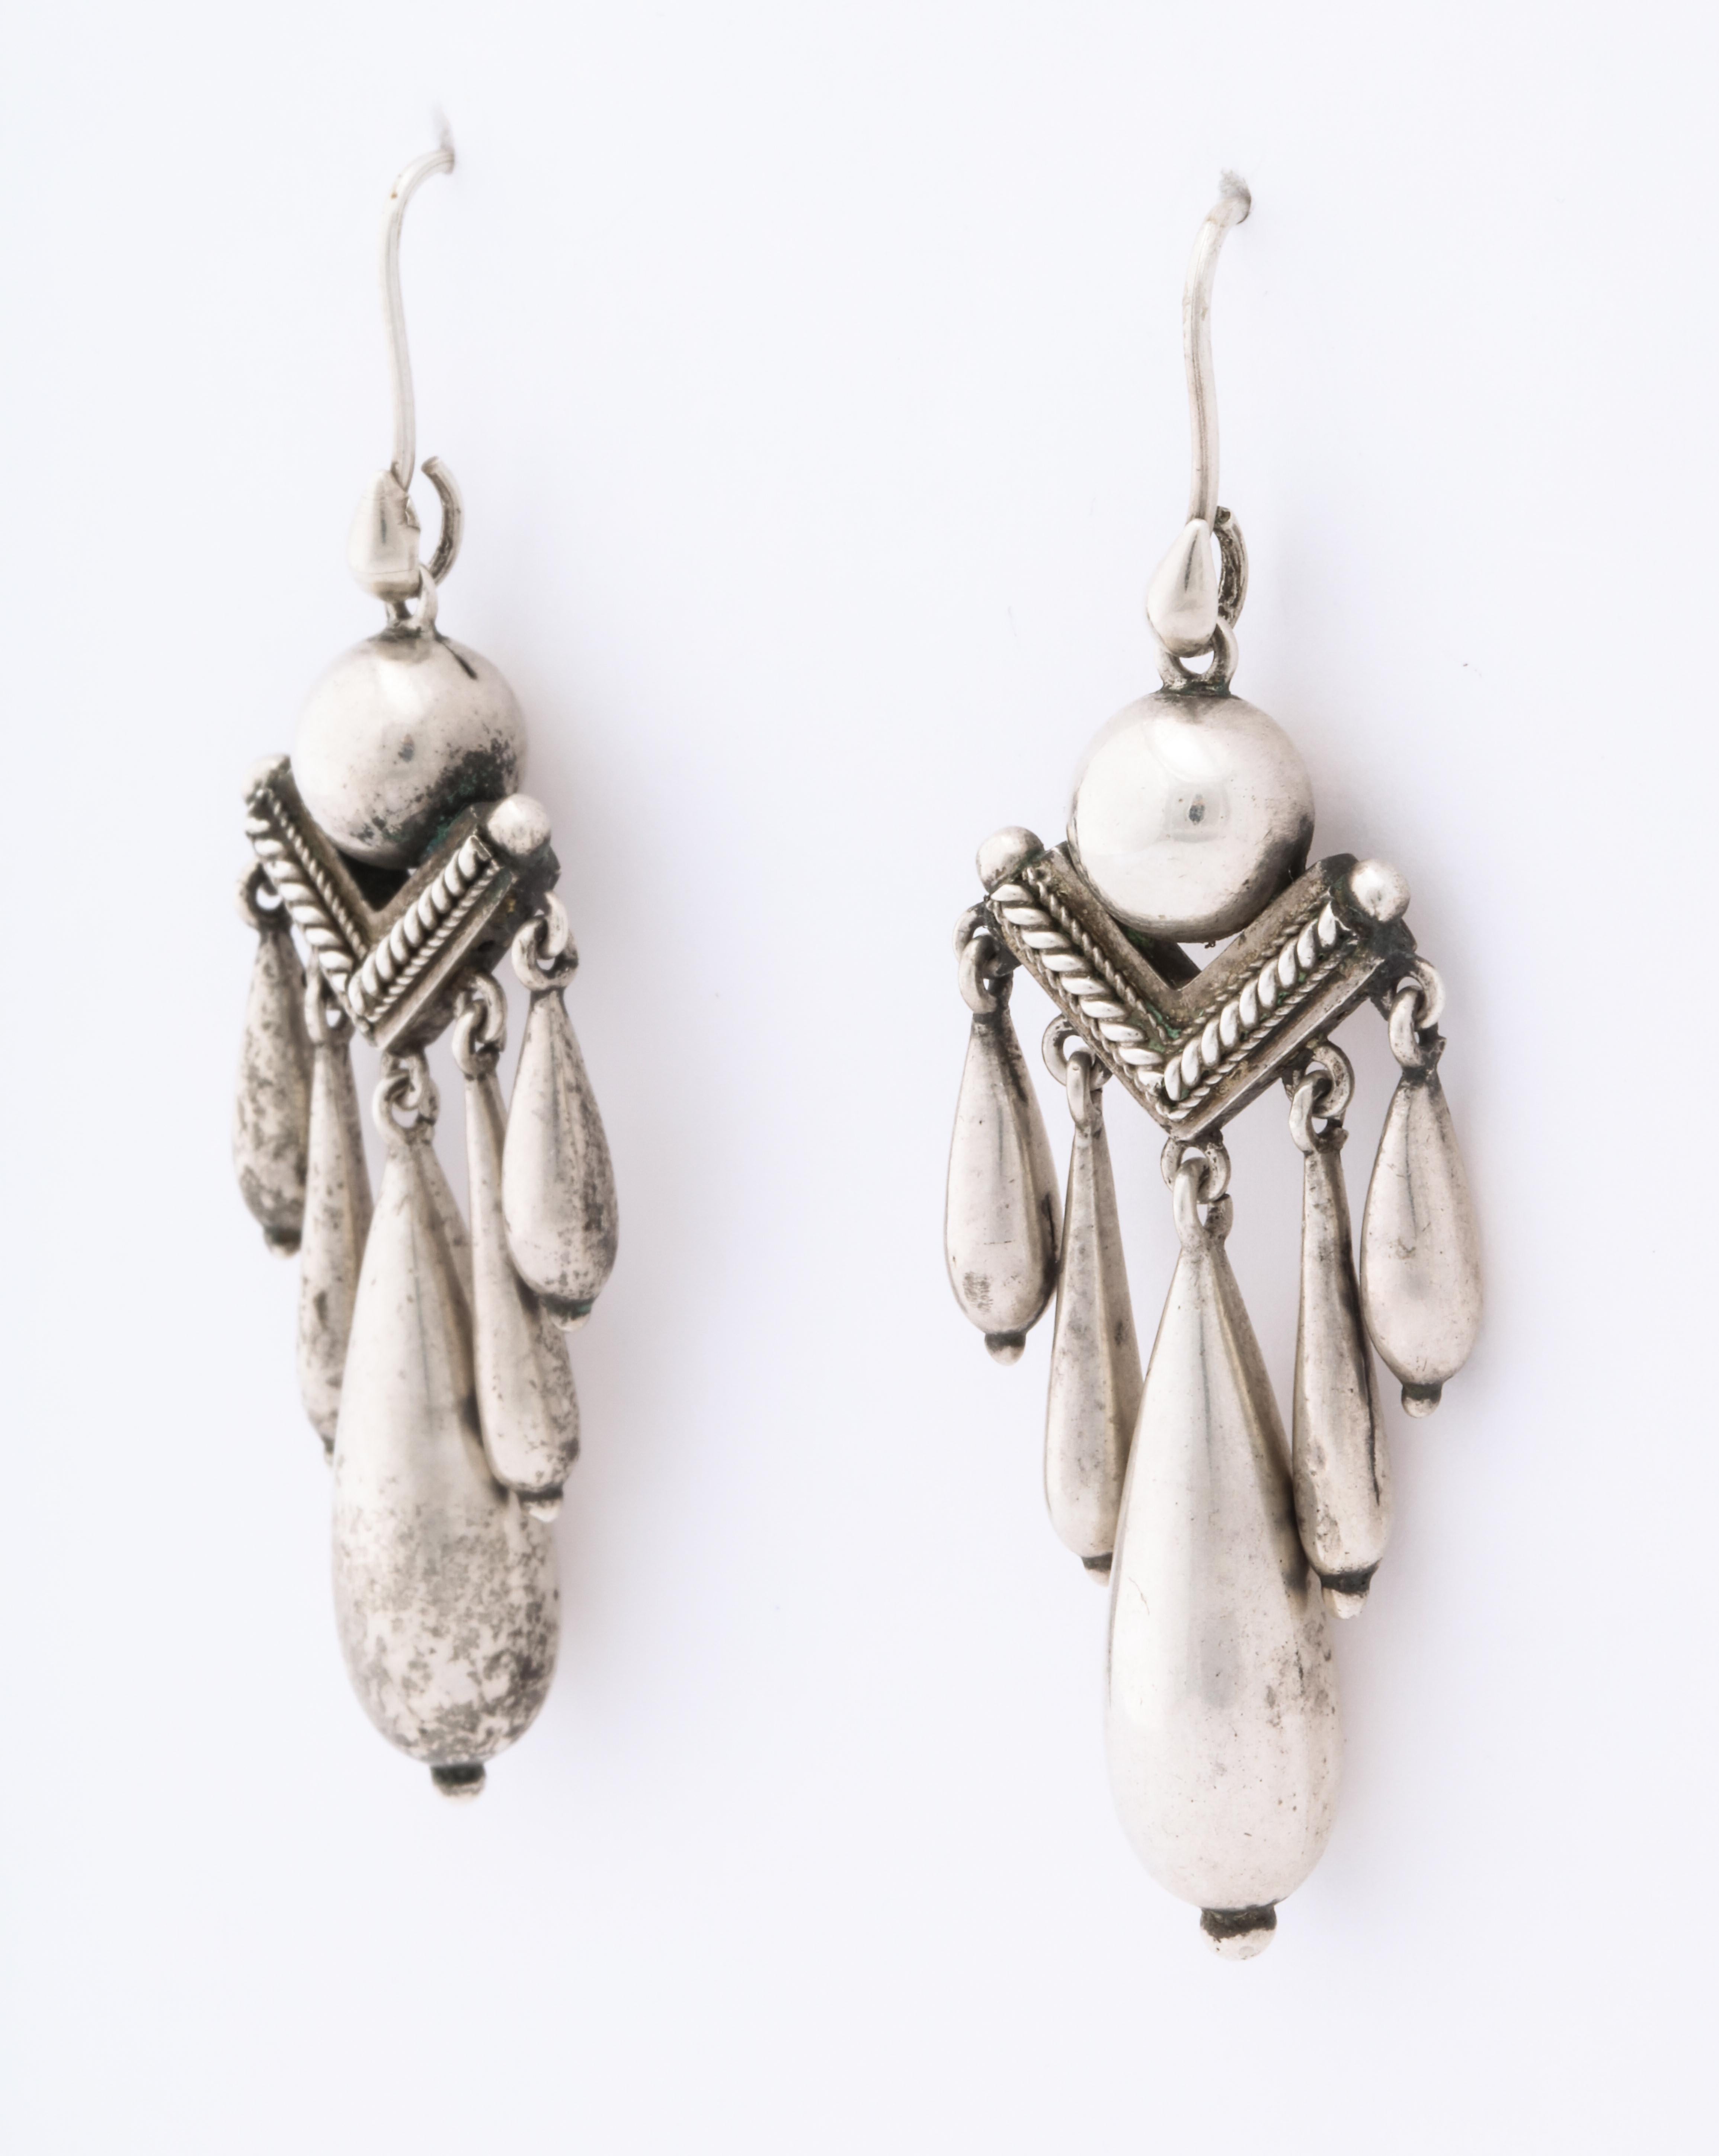 Light in weight Silver Victorian Chandelier Earrings are rare to the market whereas gold earrings are plentiful. I can only surmise loss to be the reason. The same is true of Georgian Silver Earrings and Chains. These earrings were made with a